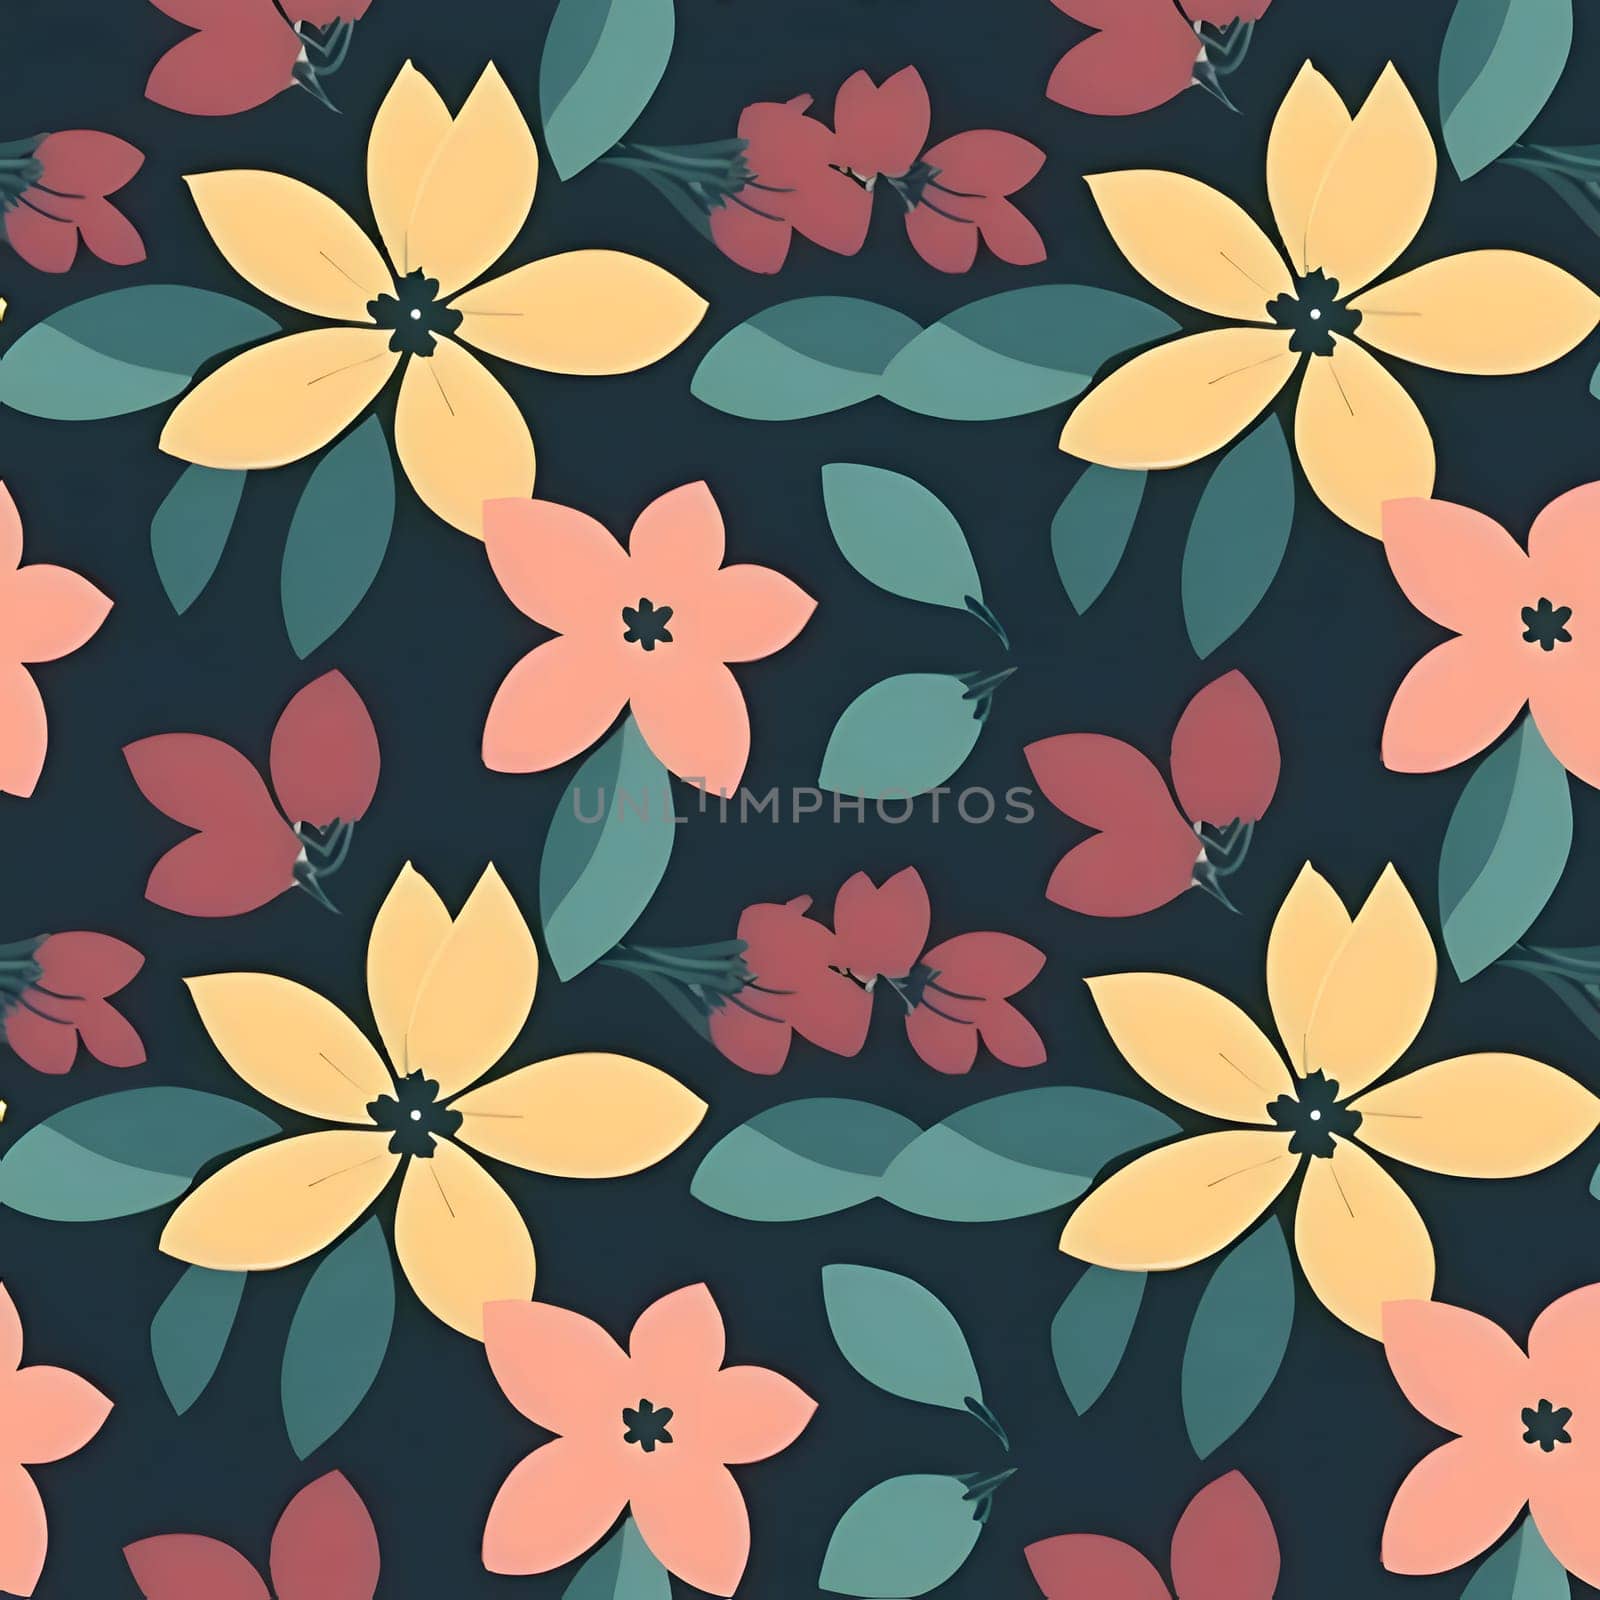 Patterns and banners backgrounds: Seamless pattern with flowers. Vector illustration in retro style.